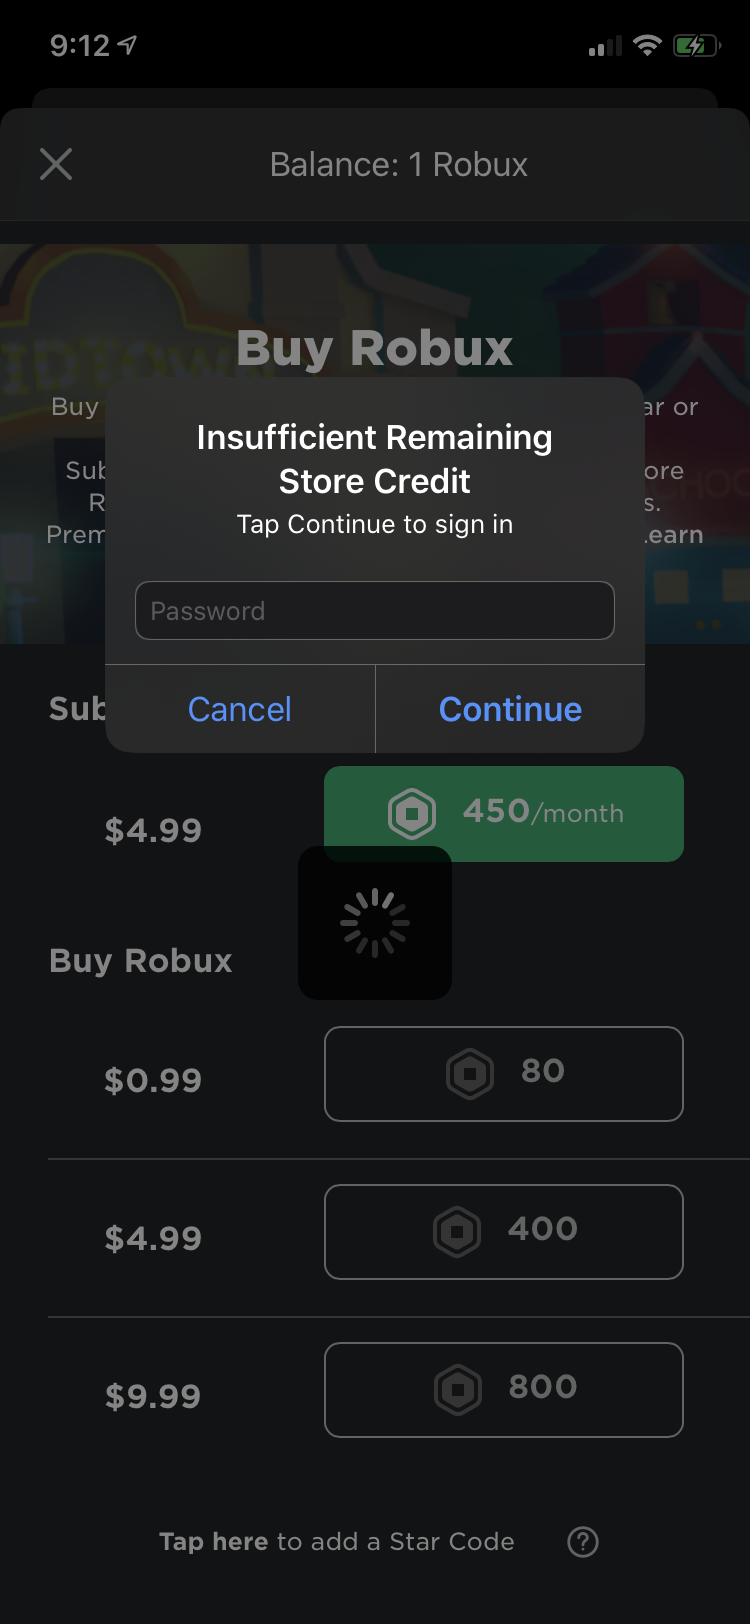 Insufficient Funds Itunes Apple Community - how much is 10 dollars worth of robux